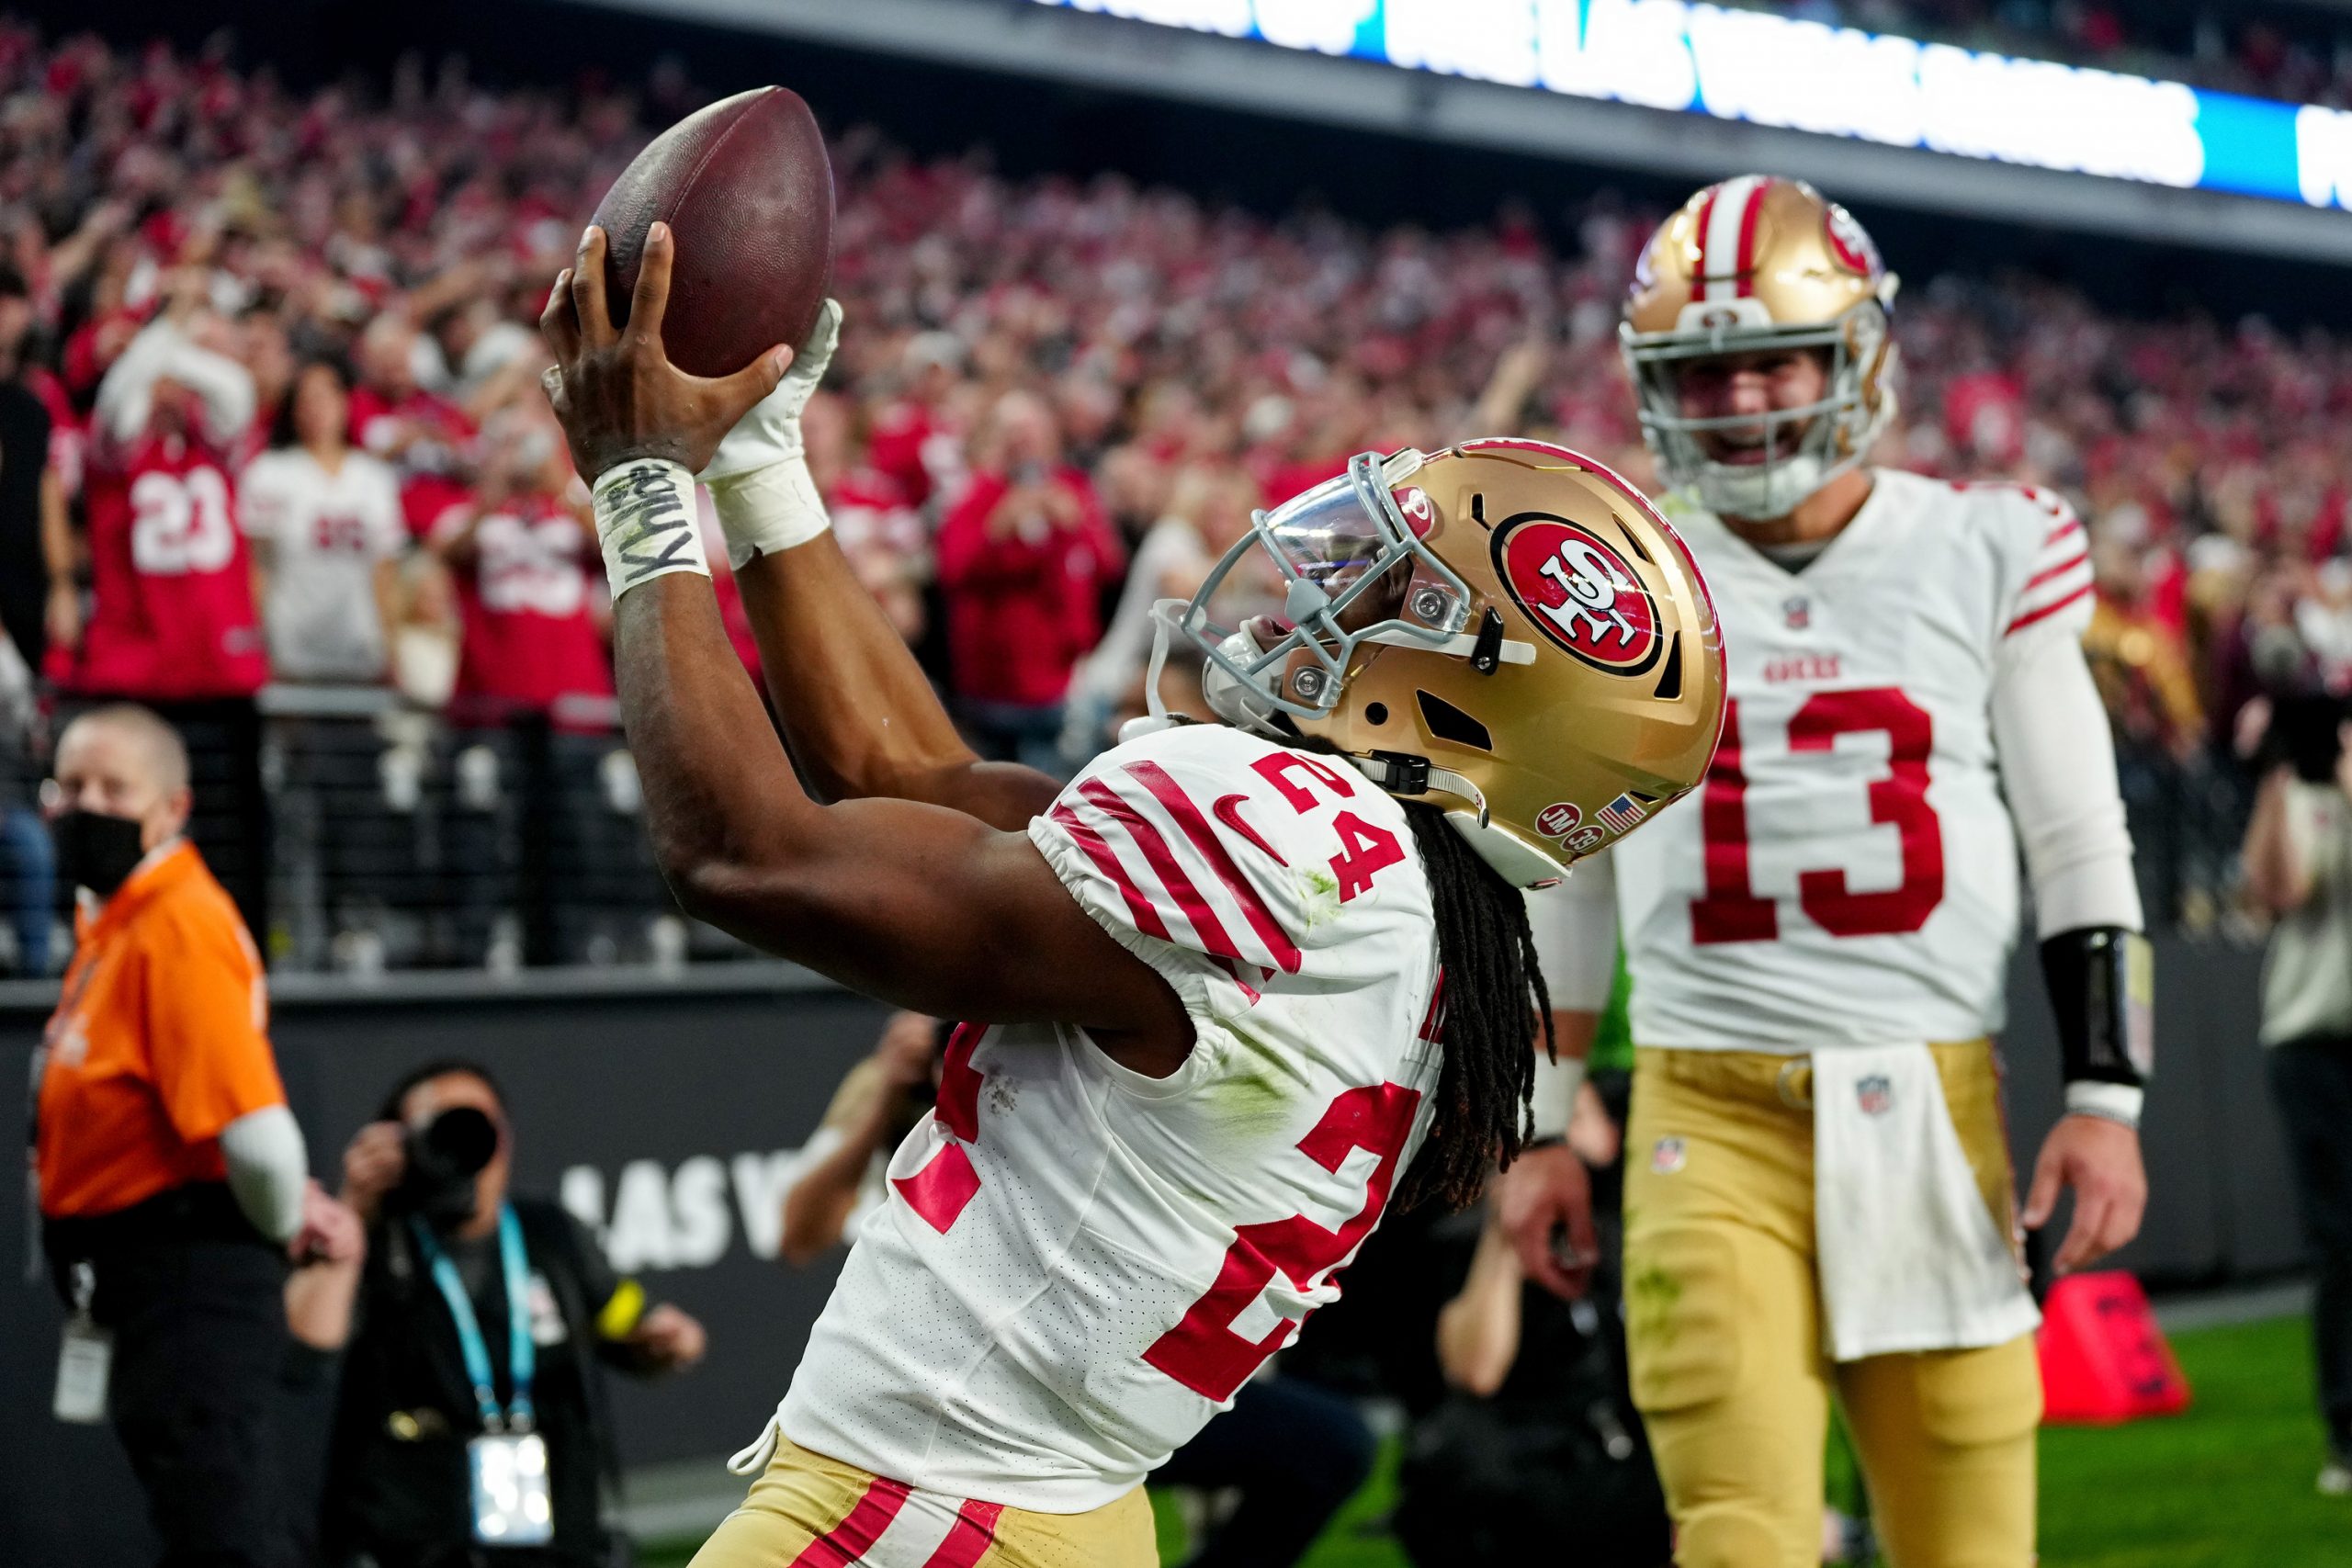 49ers Playoff games will be determined by who plays clean football.